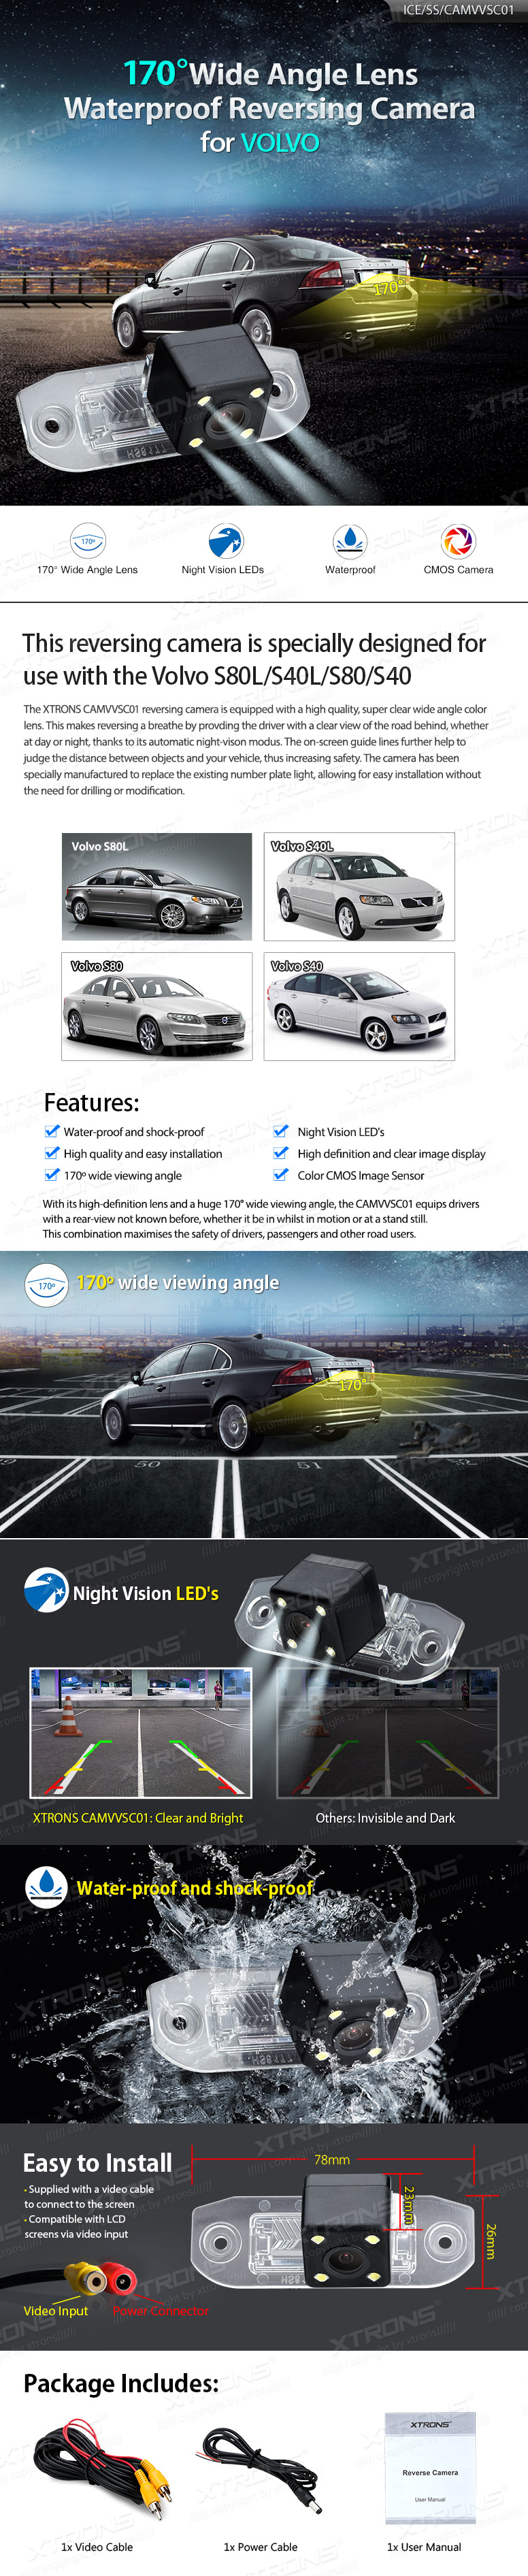 Volvo S80L/S40L/S80/S40, Xtrons Parking Rear View Camera with RCA Connector for Multimedia Navigation Radio. Rear view camera for aftermarket radio